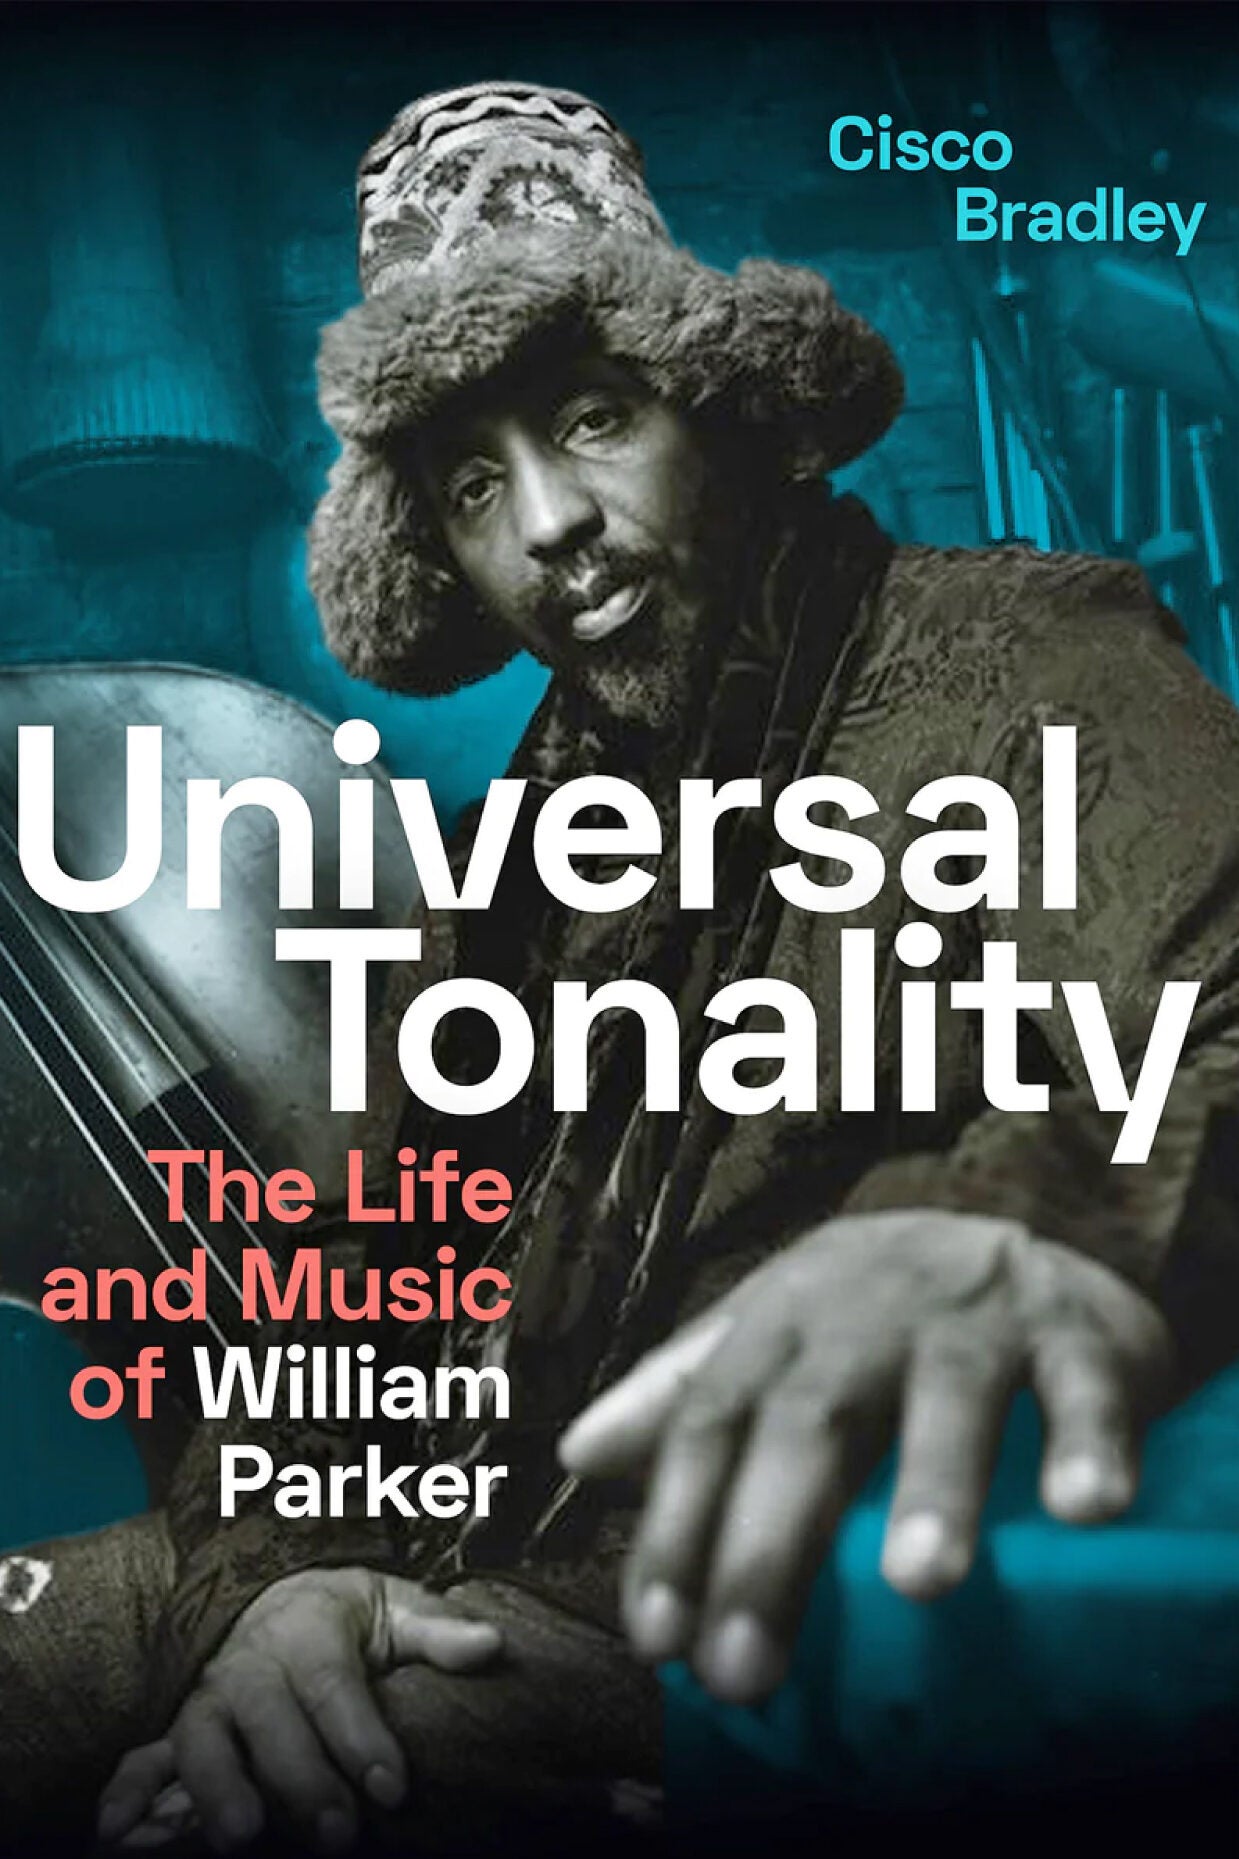 Book cover: "Universal Tonality: The Life and Music of William Parker ."